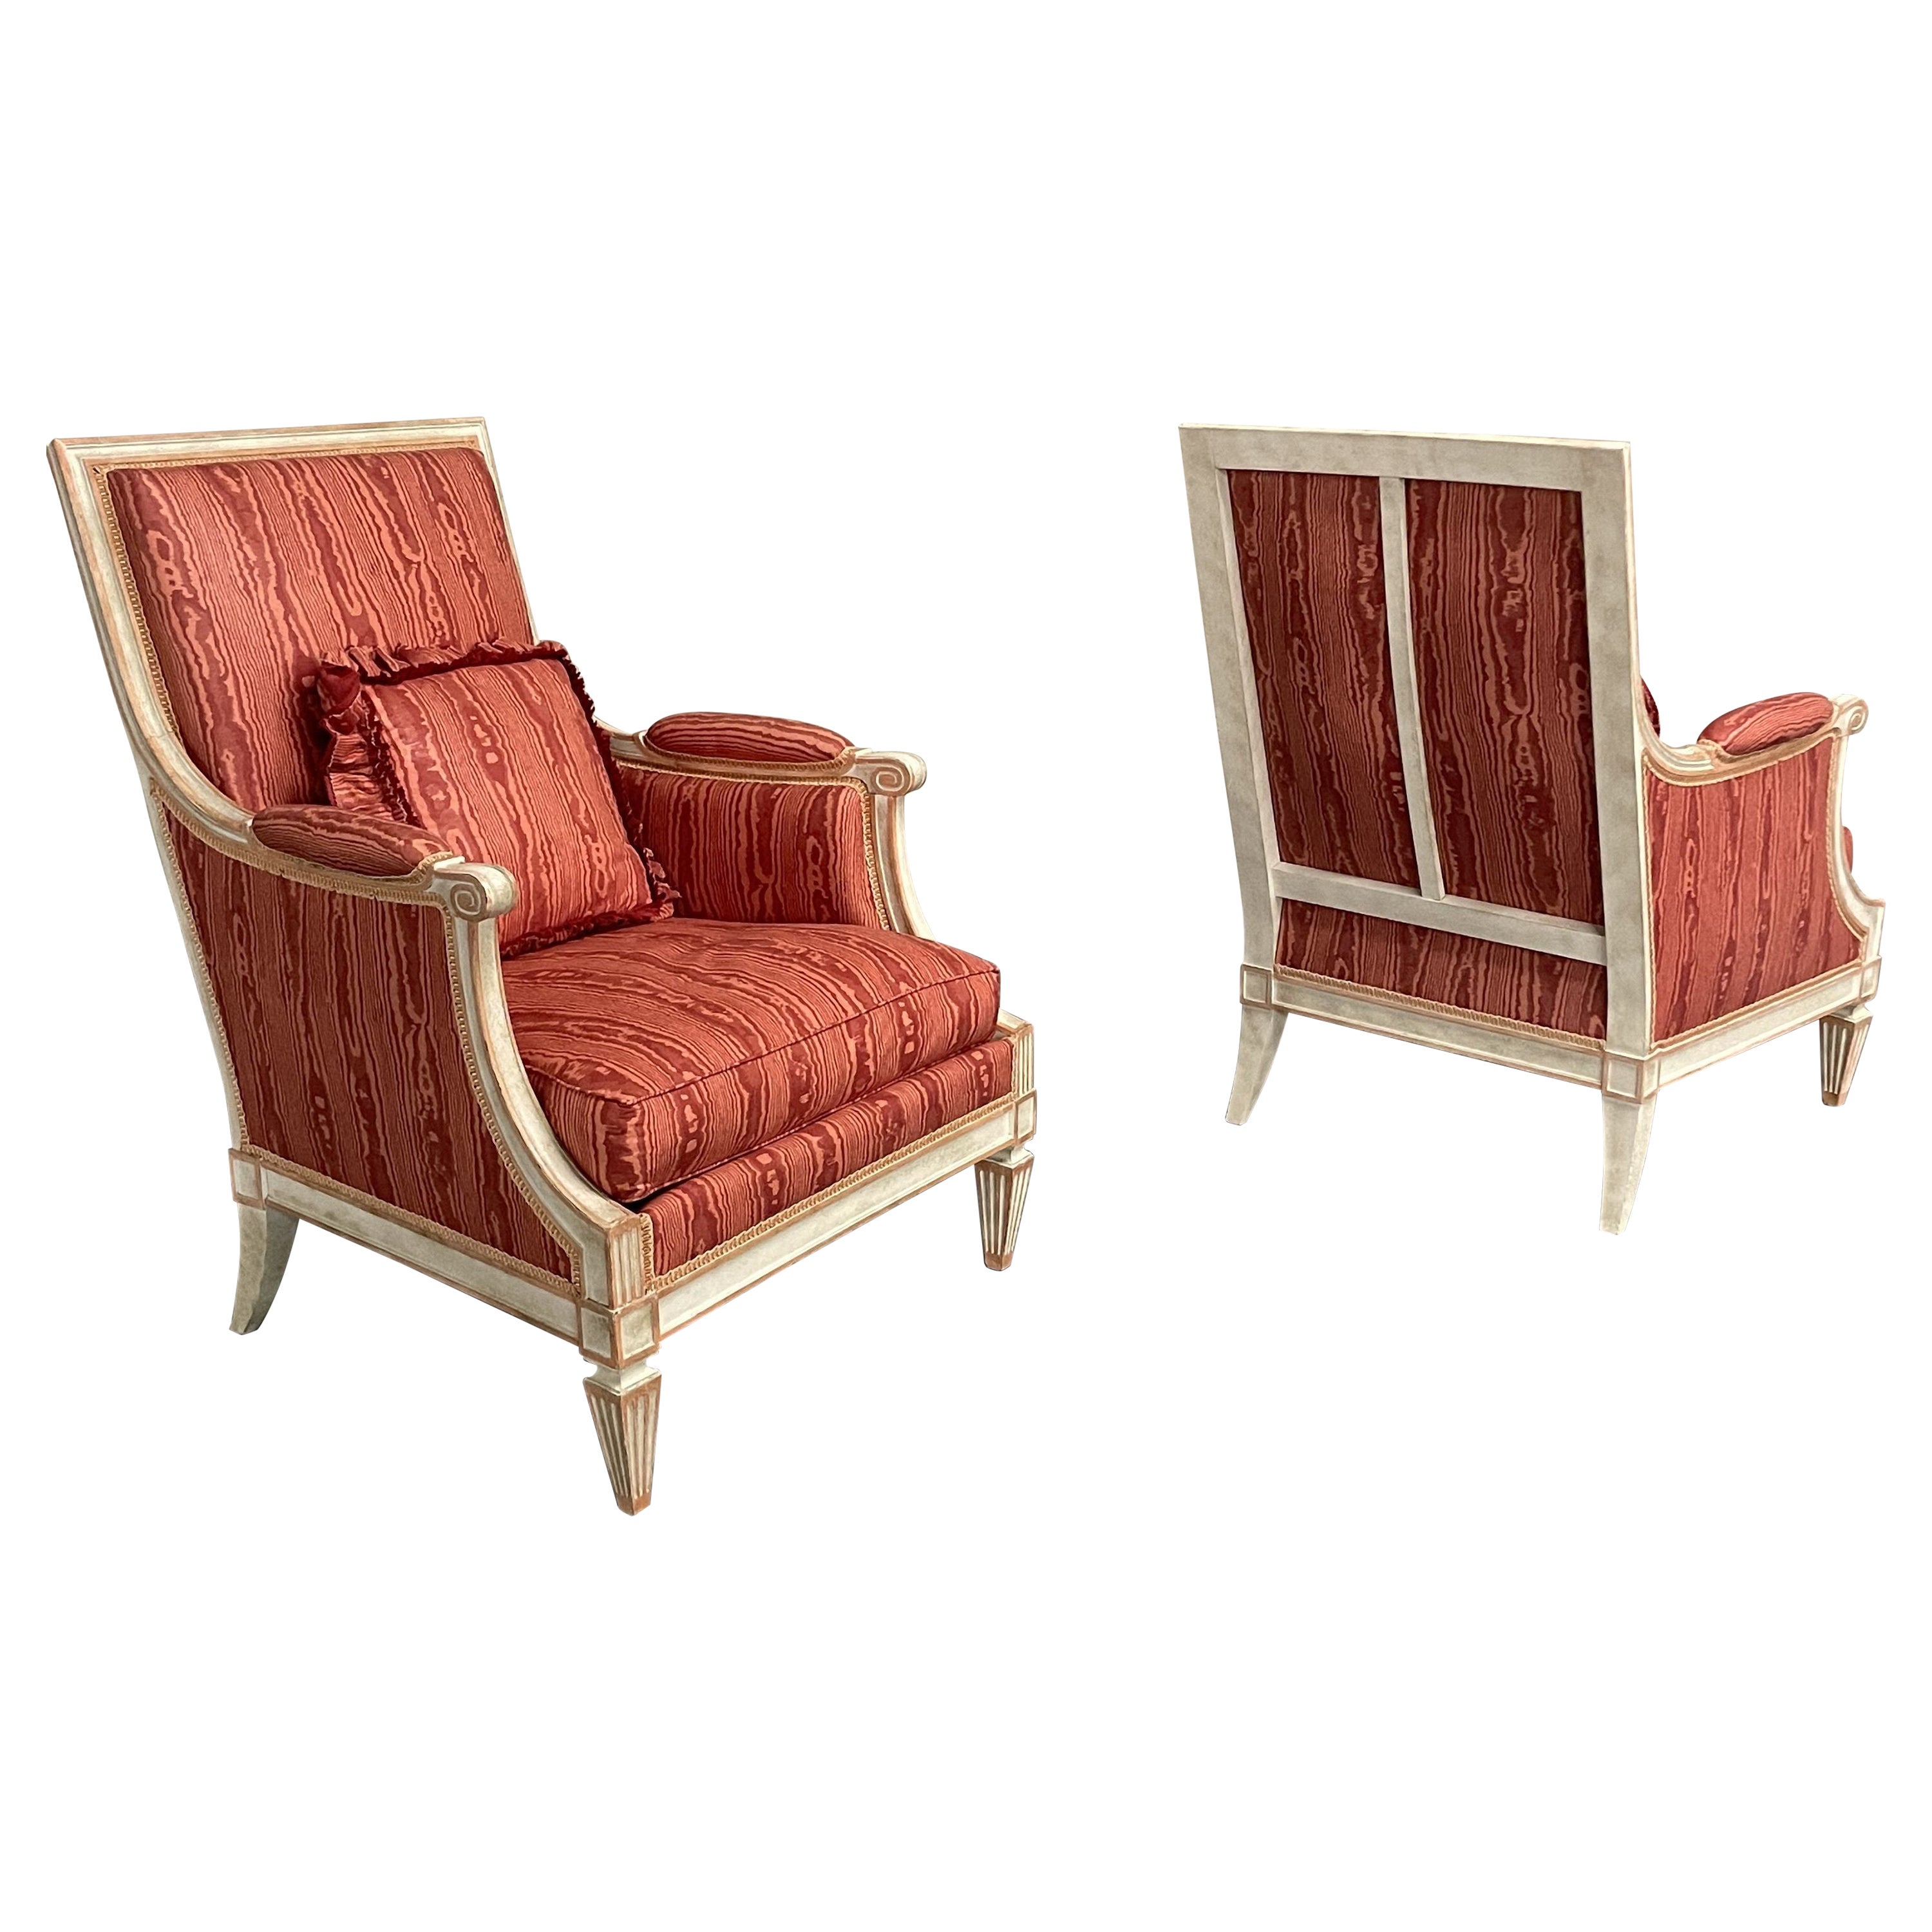 Pair of Louis XVI Style Painted Bergère Arm/Lounge Chairs, Traditional, France